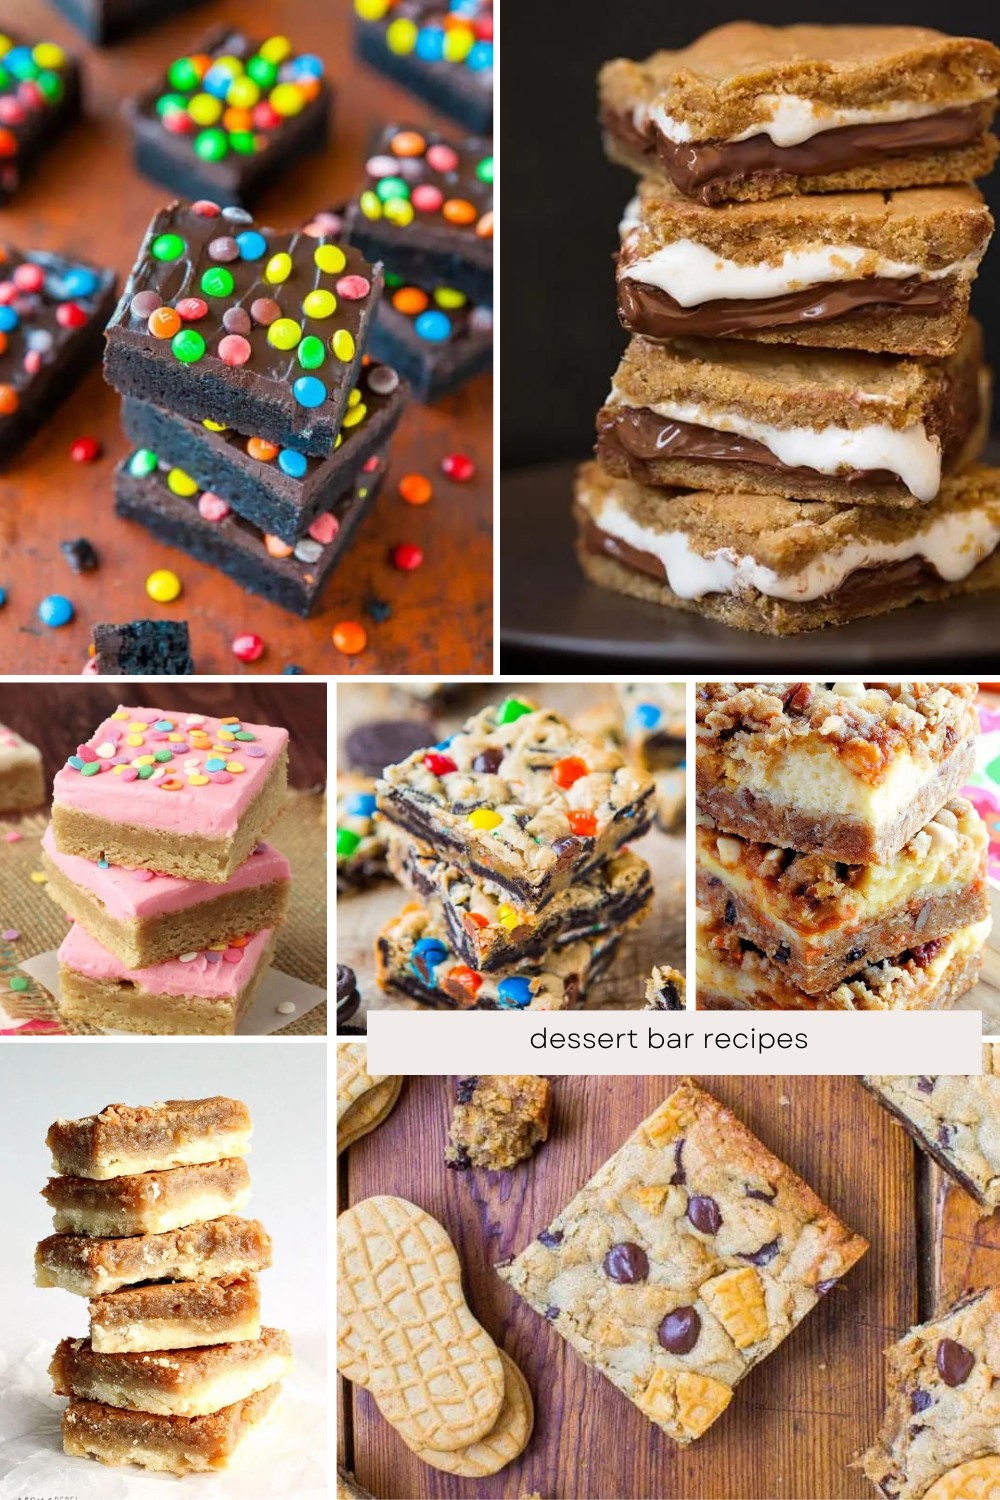 Craving something sweet? These dessert bar recipes are so delicious, you’ll forget all about your diet plans! From gooey brownies to fruity delights, these treats are perfect for satisfying your sweet tooth. Save this pin for your next baking adventure! #DessertLovers #SweetTreats

